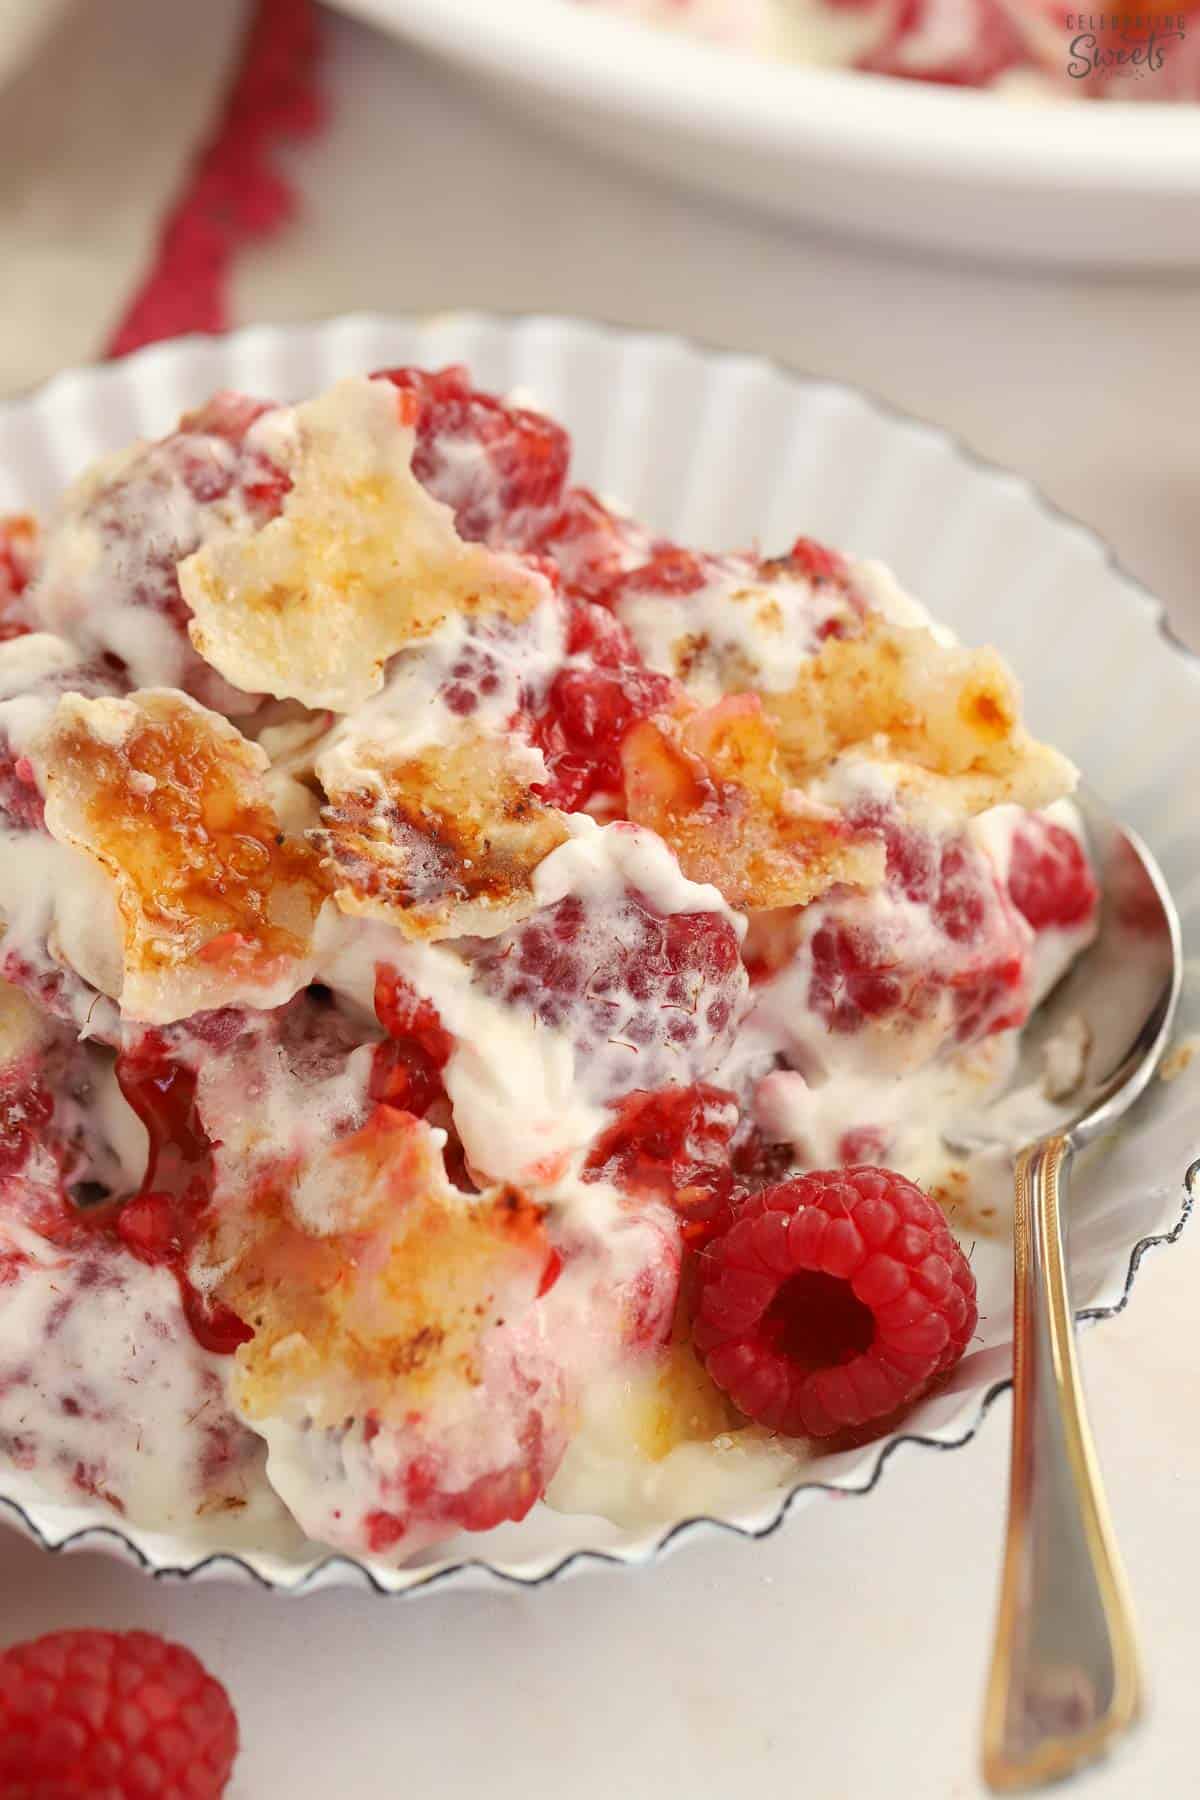 Berries, whipped cream, and caramelized sugar in a white baking dish.